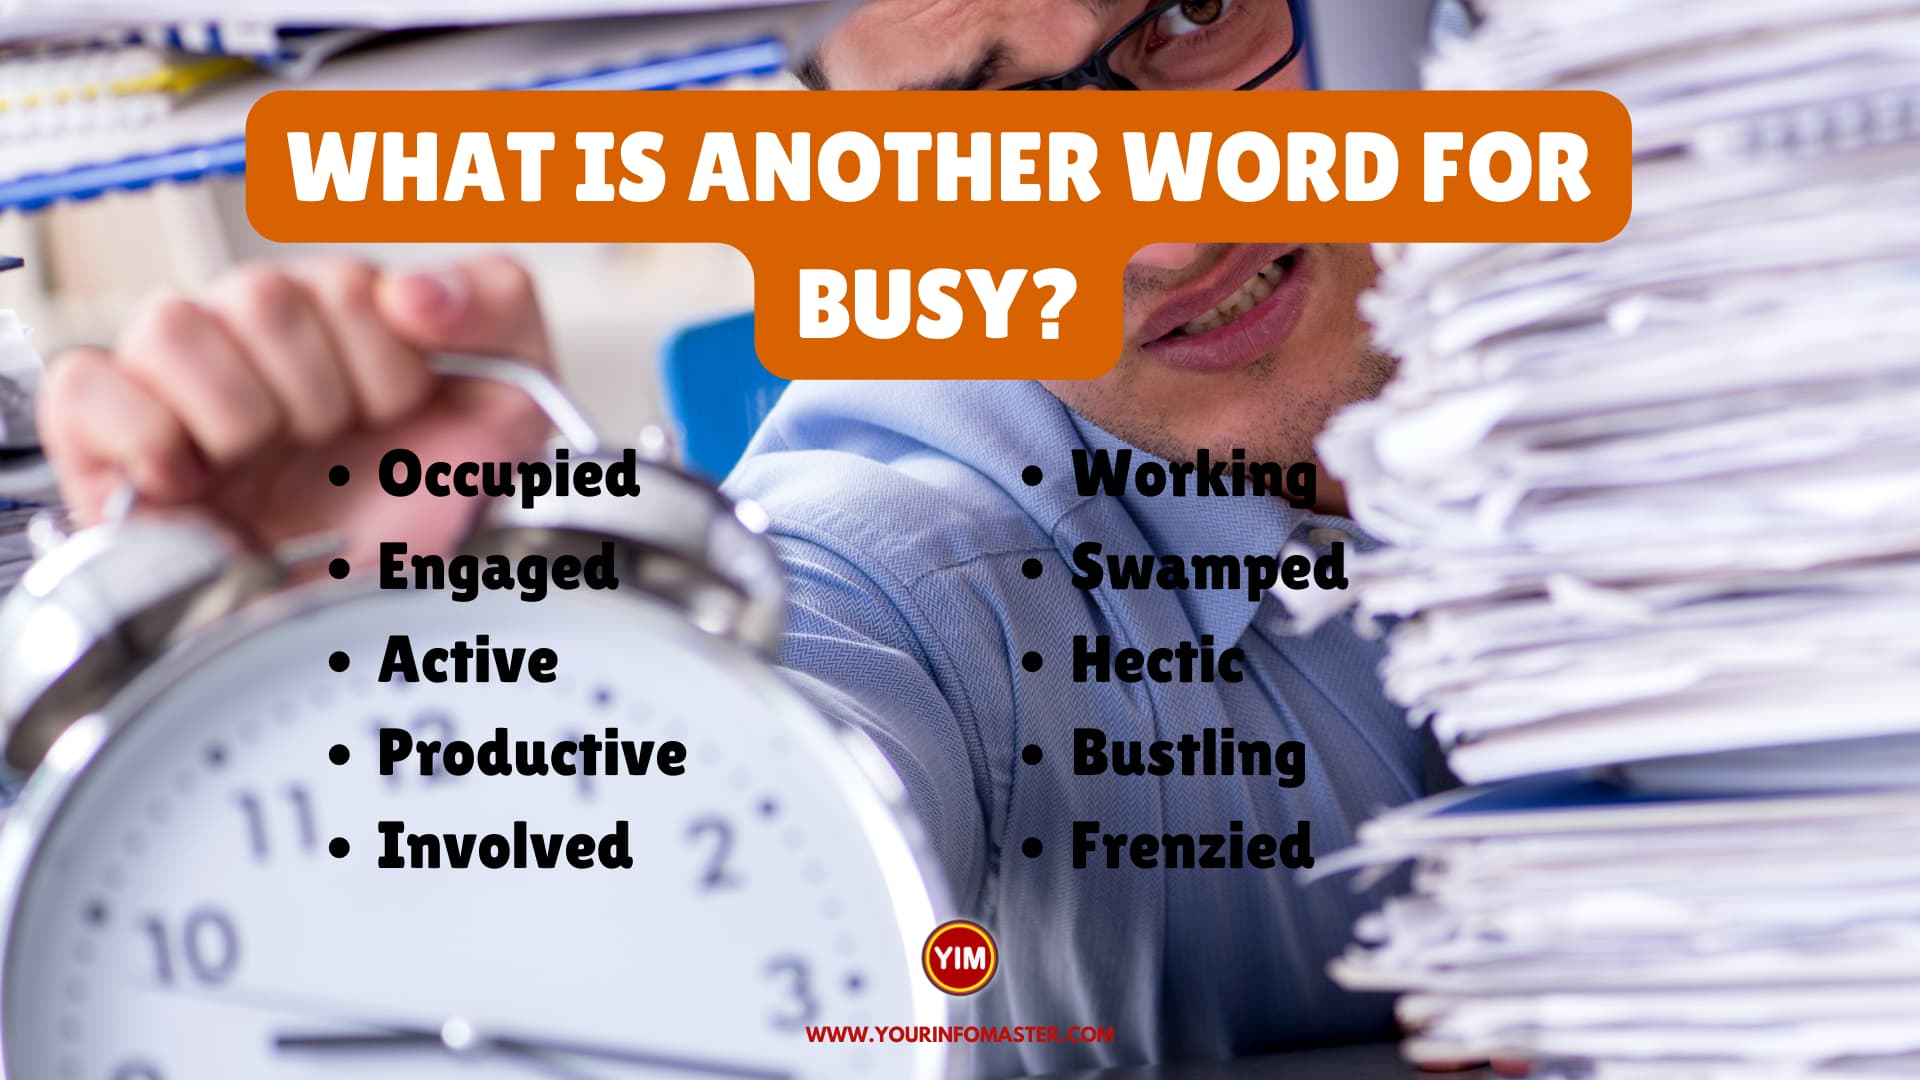 What is another word for Busy